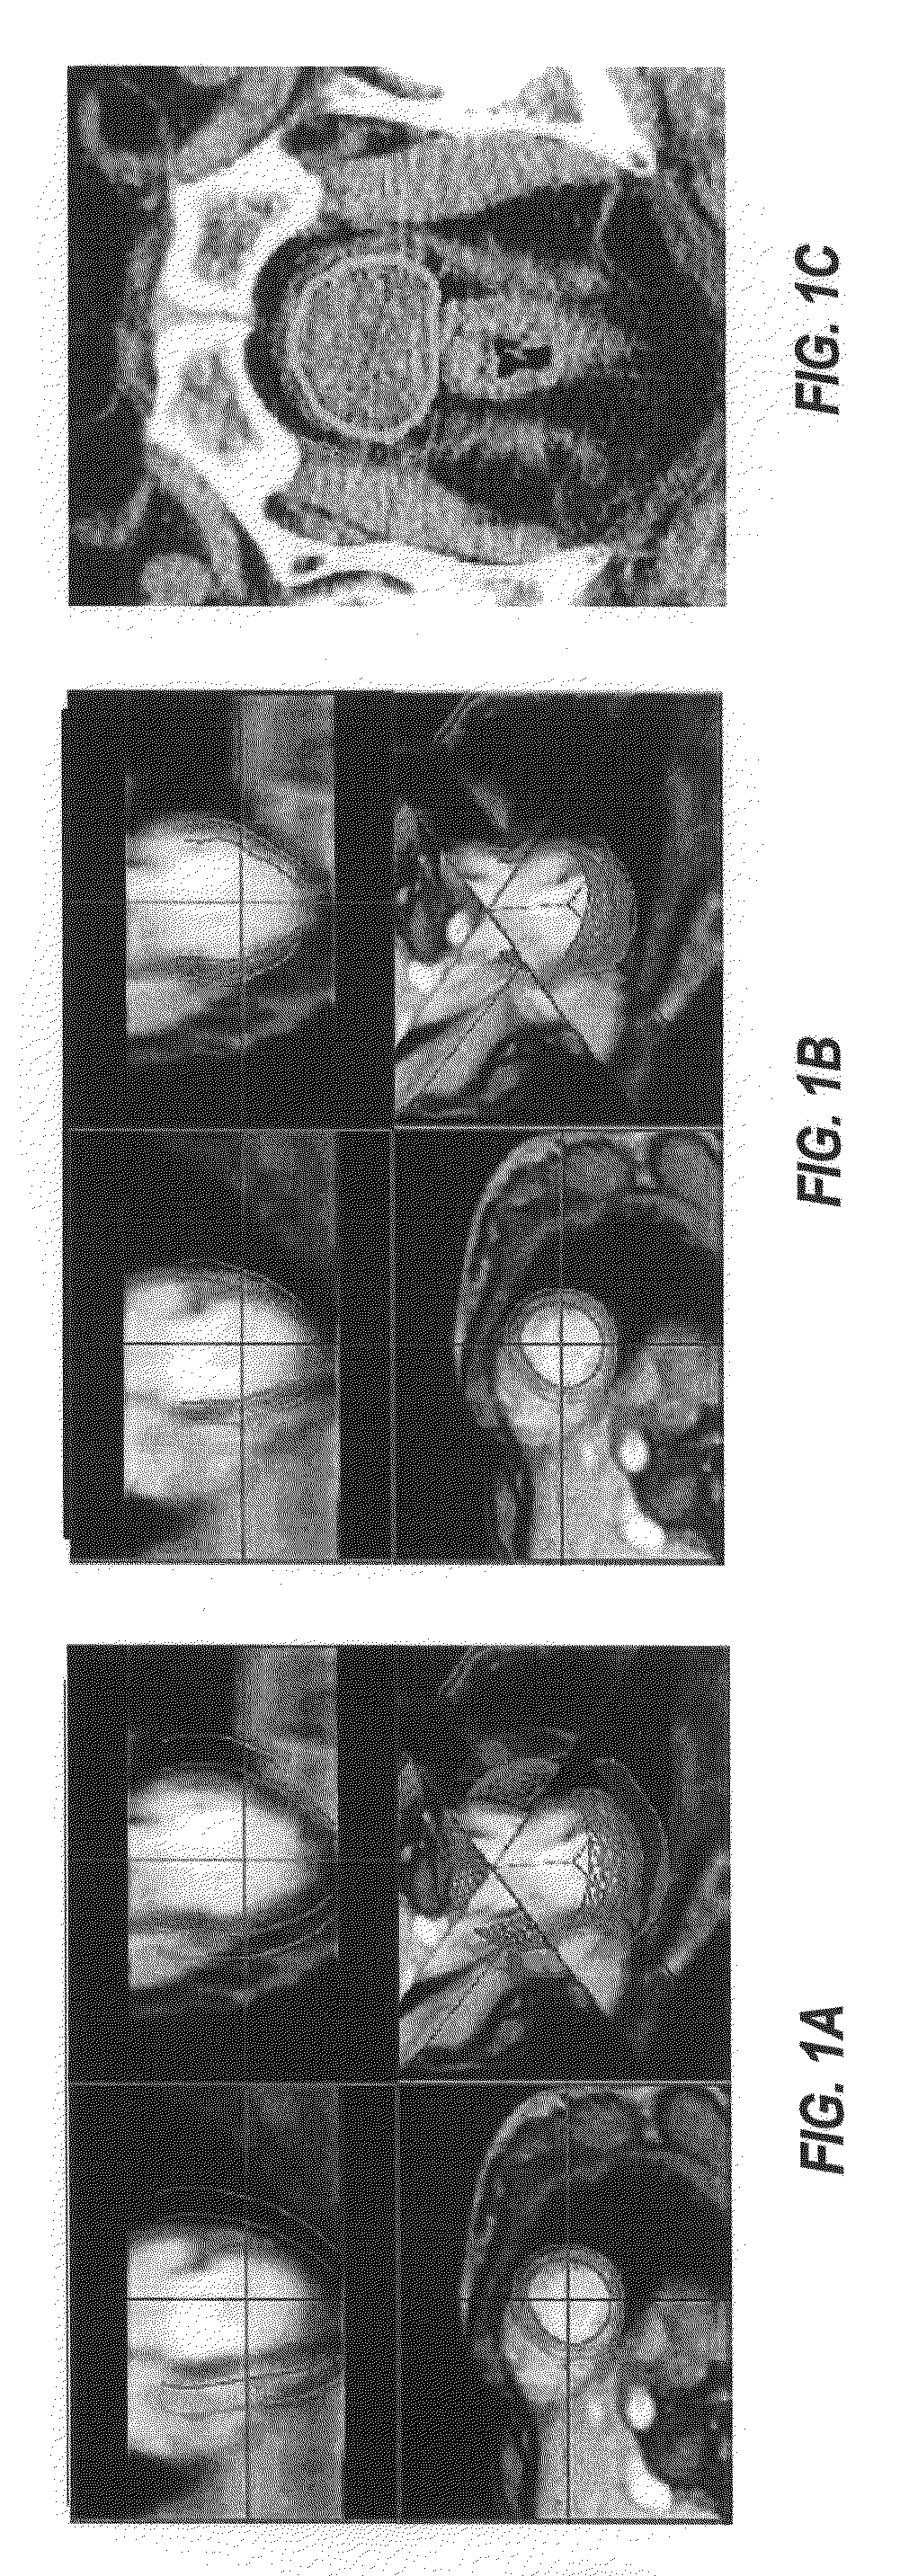 System and methods for image segmentation in N-dimensional space